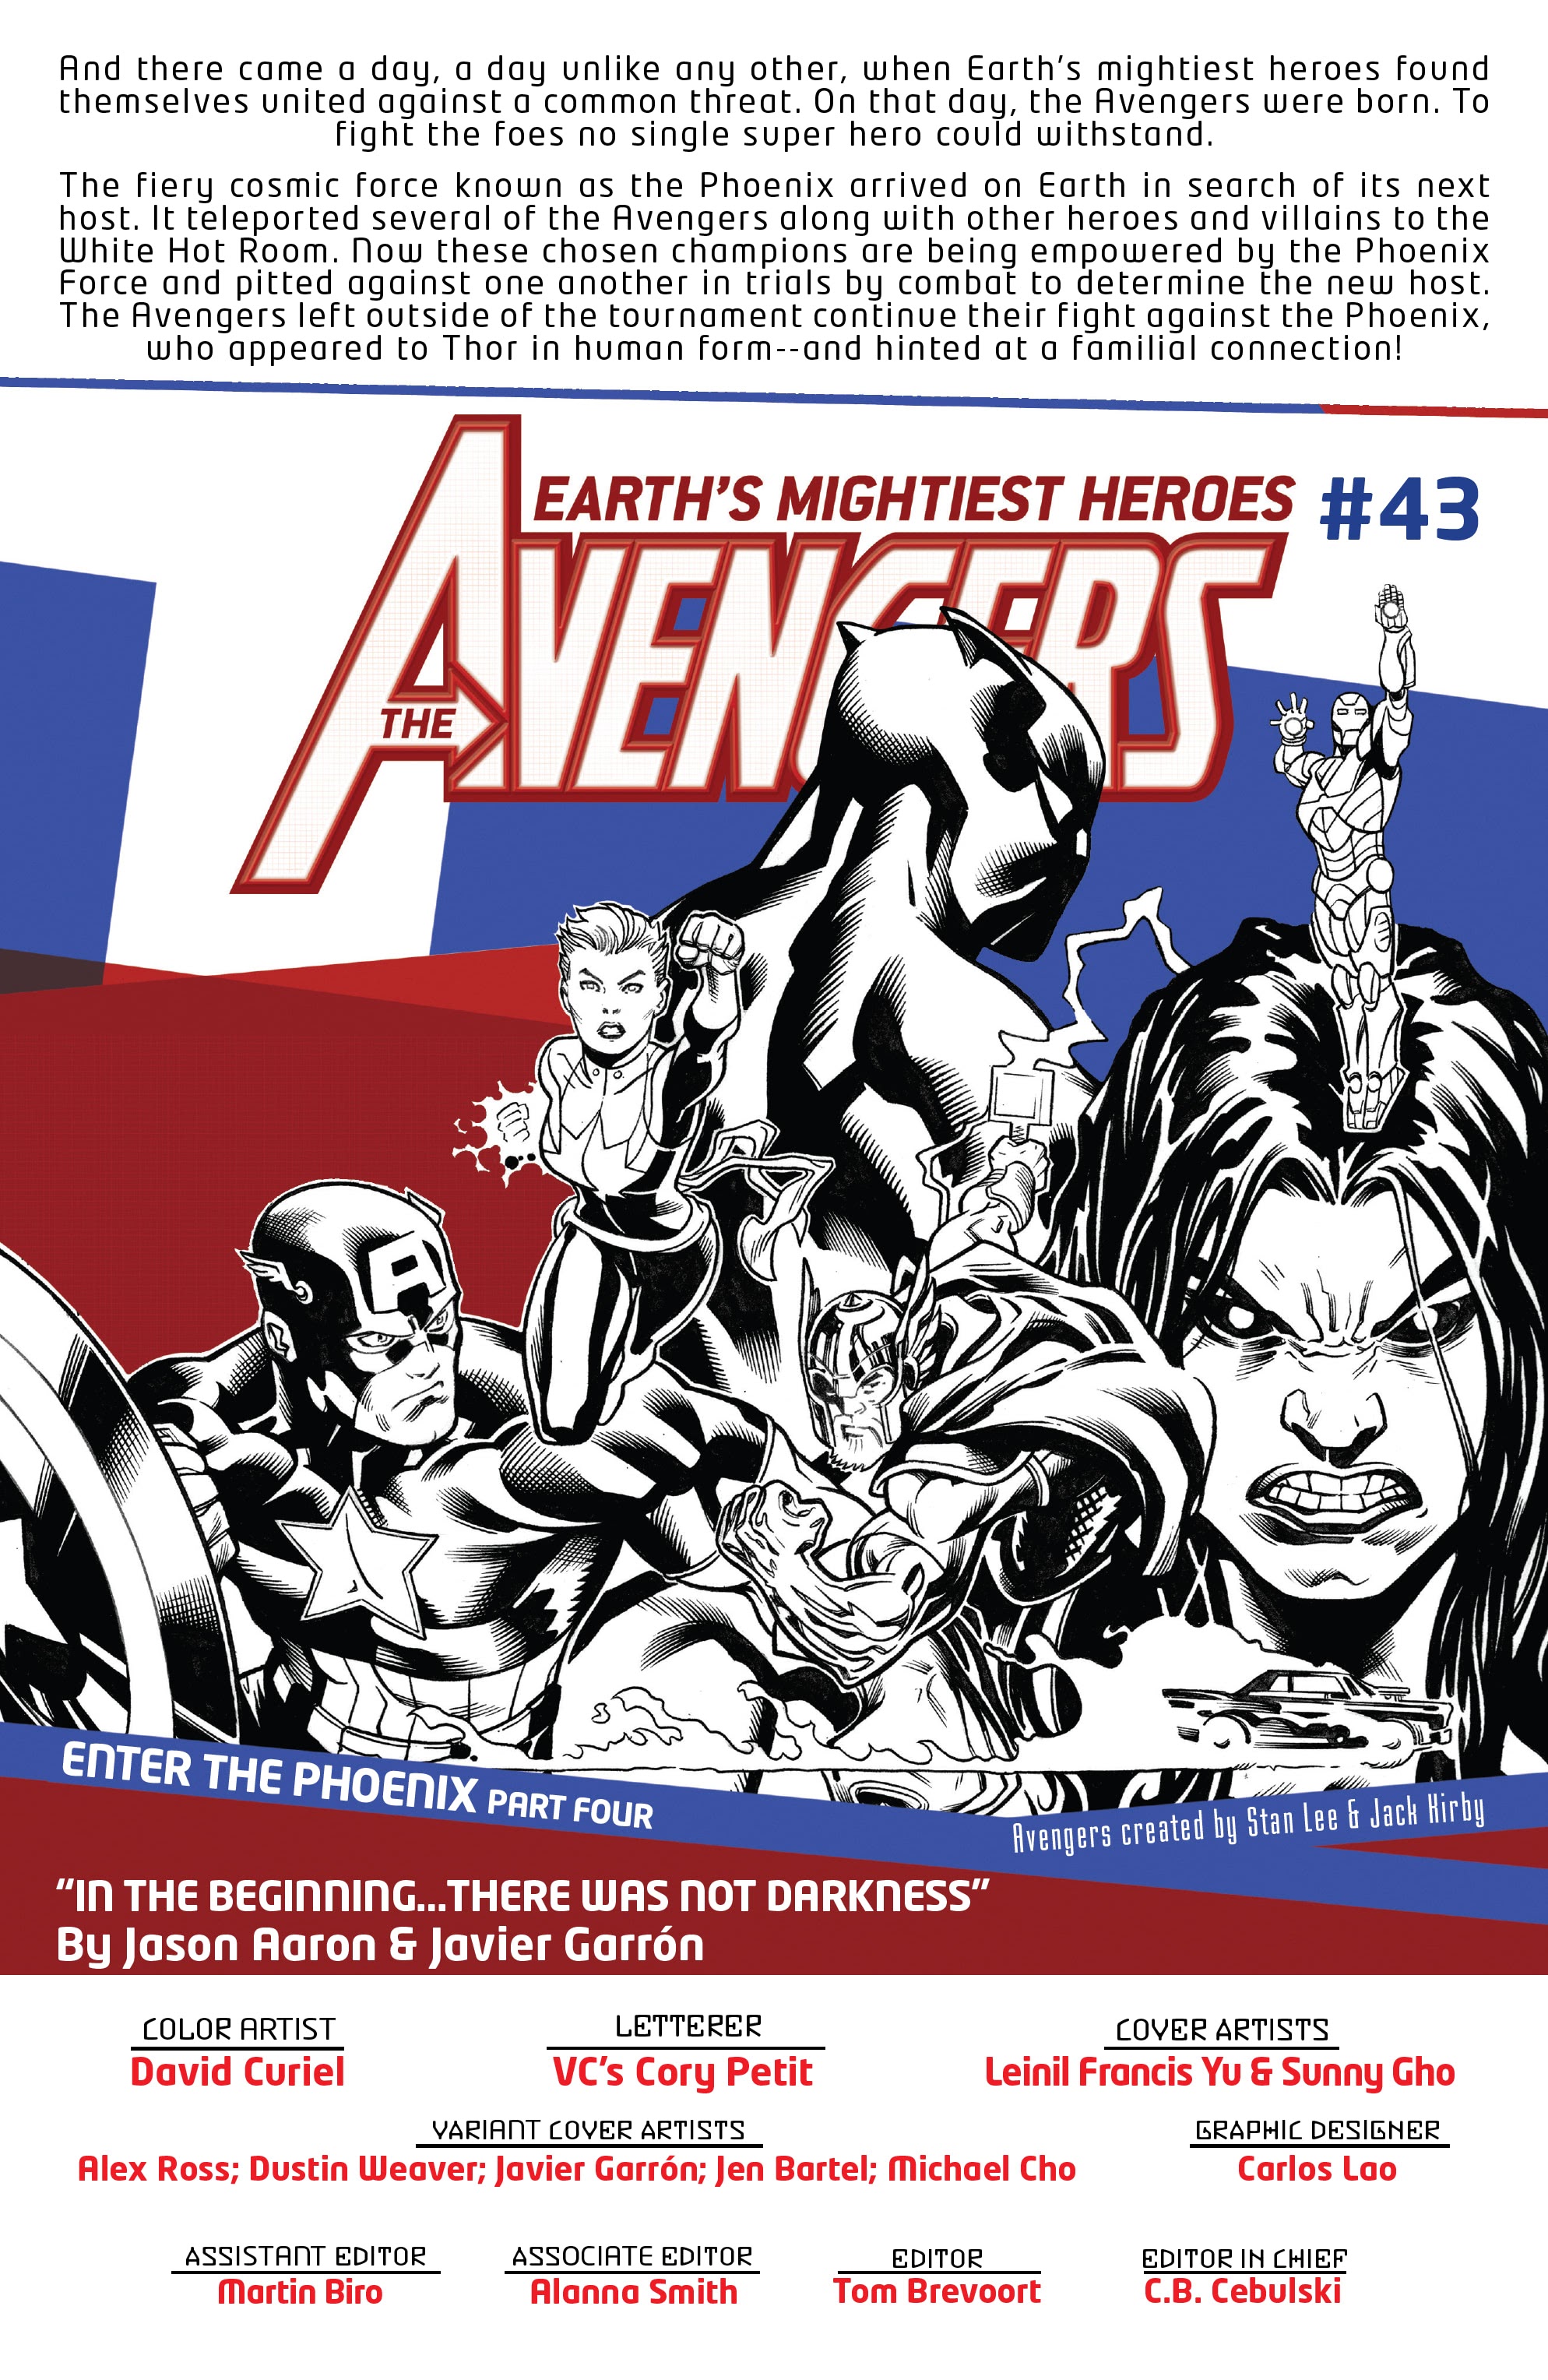 Avengers 2018 Issue 43 | Read Avengers 2018 Issue 43 comic online in high  quality. Read Full Comic online for free - Read comics online in high  quality .|viewcomiconline.com